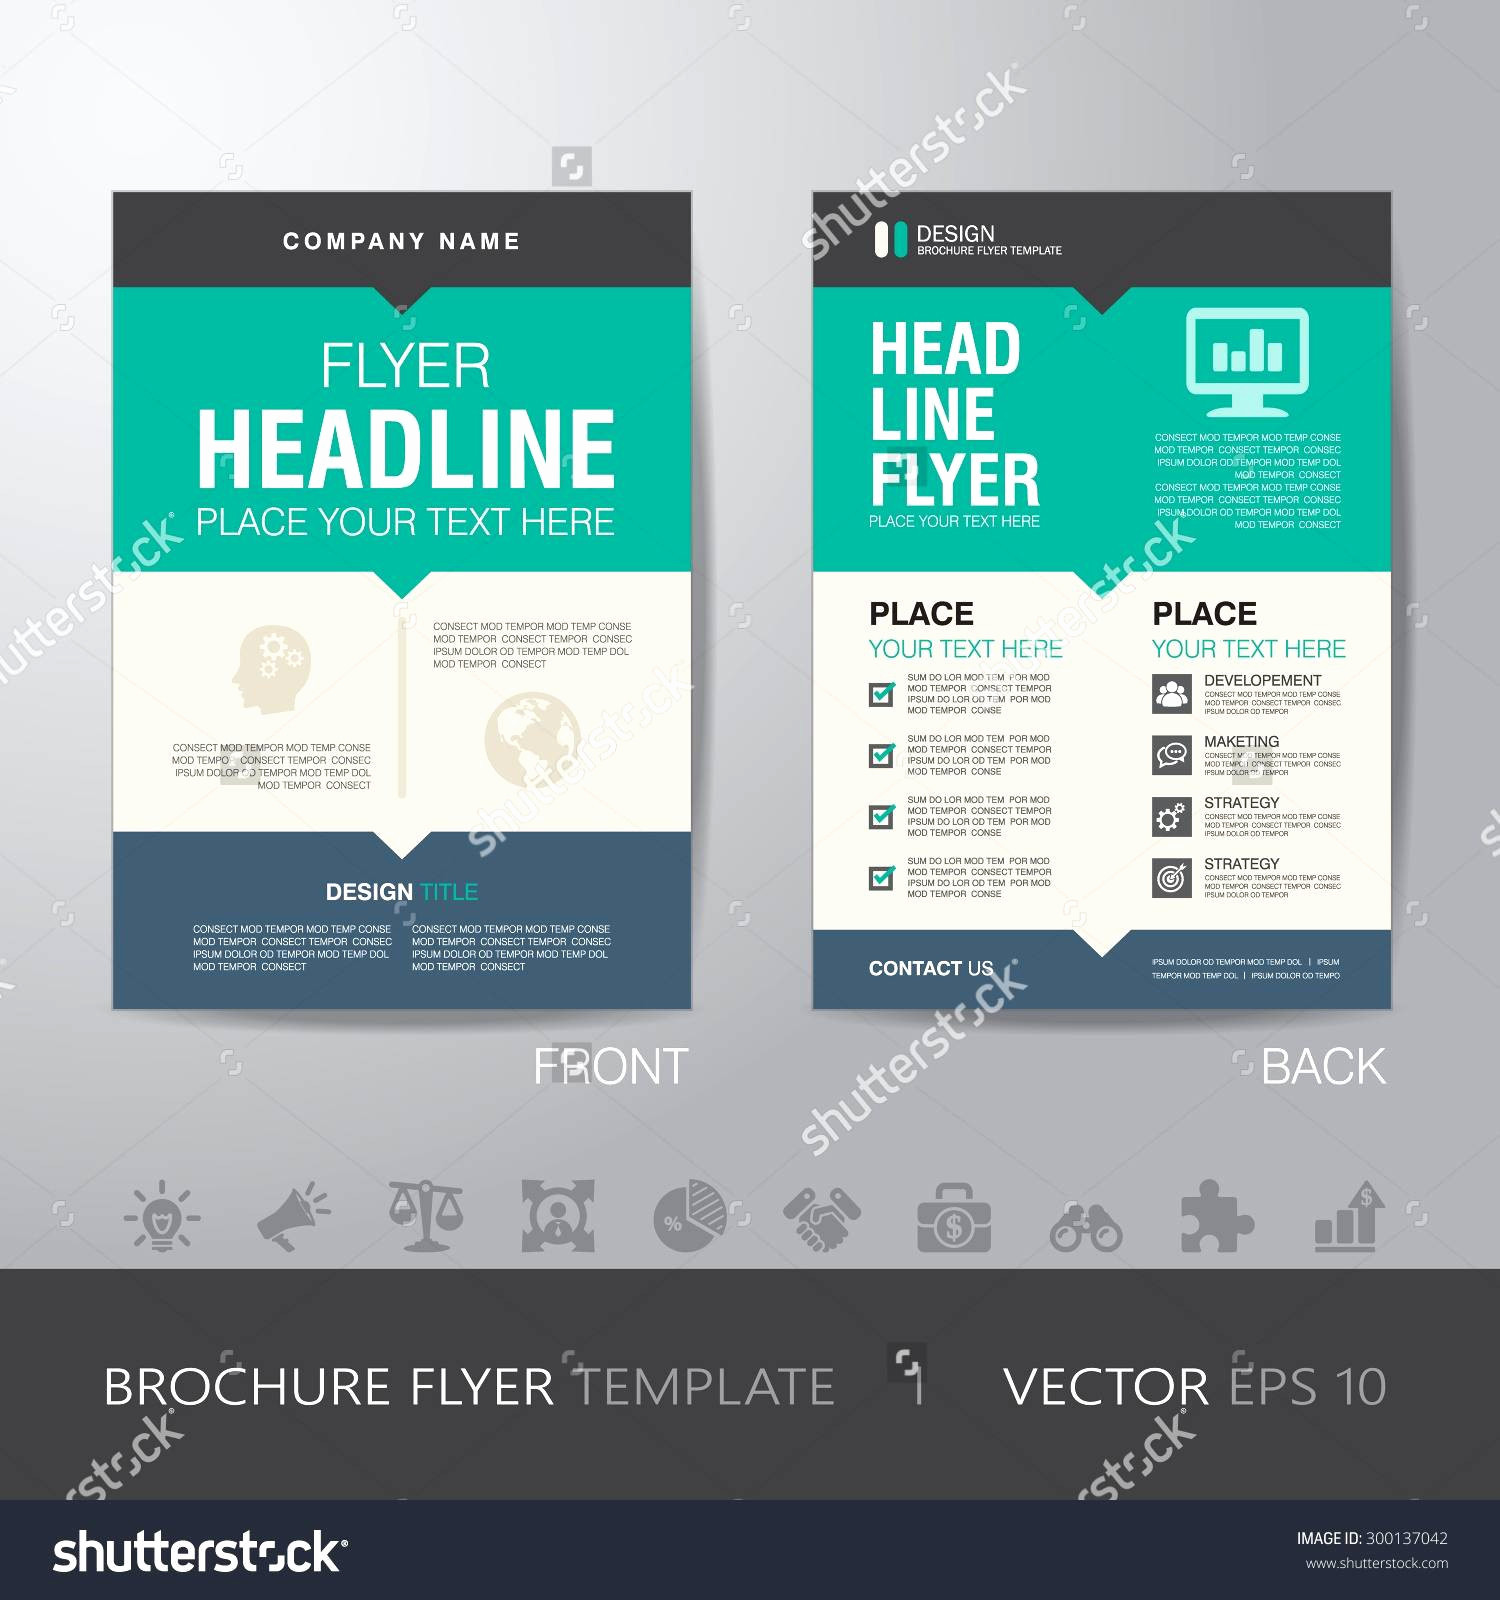 Free Indesign Resume Template Inspirational Free Indesign Of Indesign Business Card Template